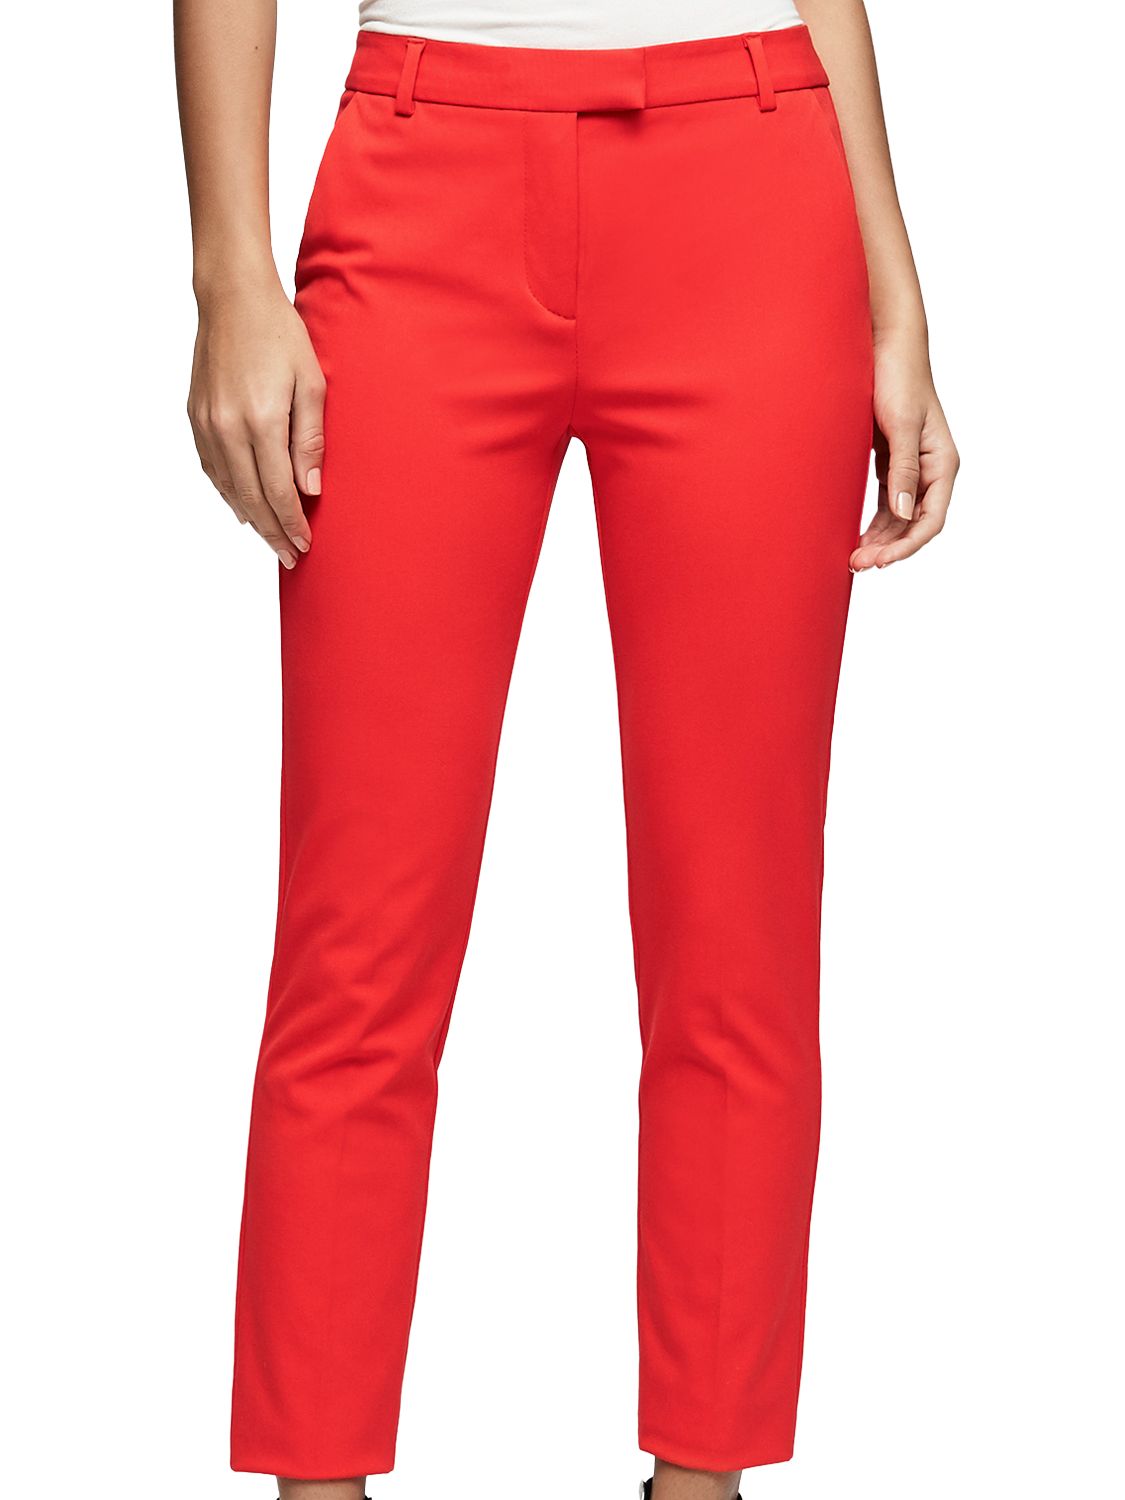 Reiss Joanne Tailored Trousers at John Lewis & Partners